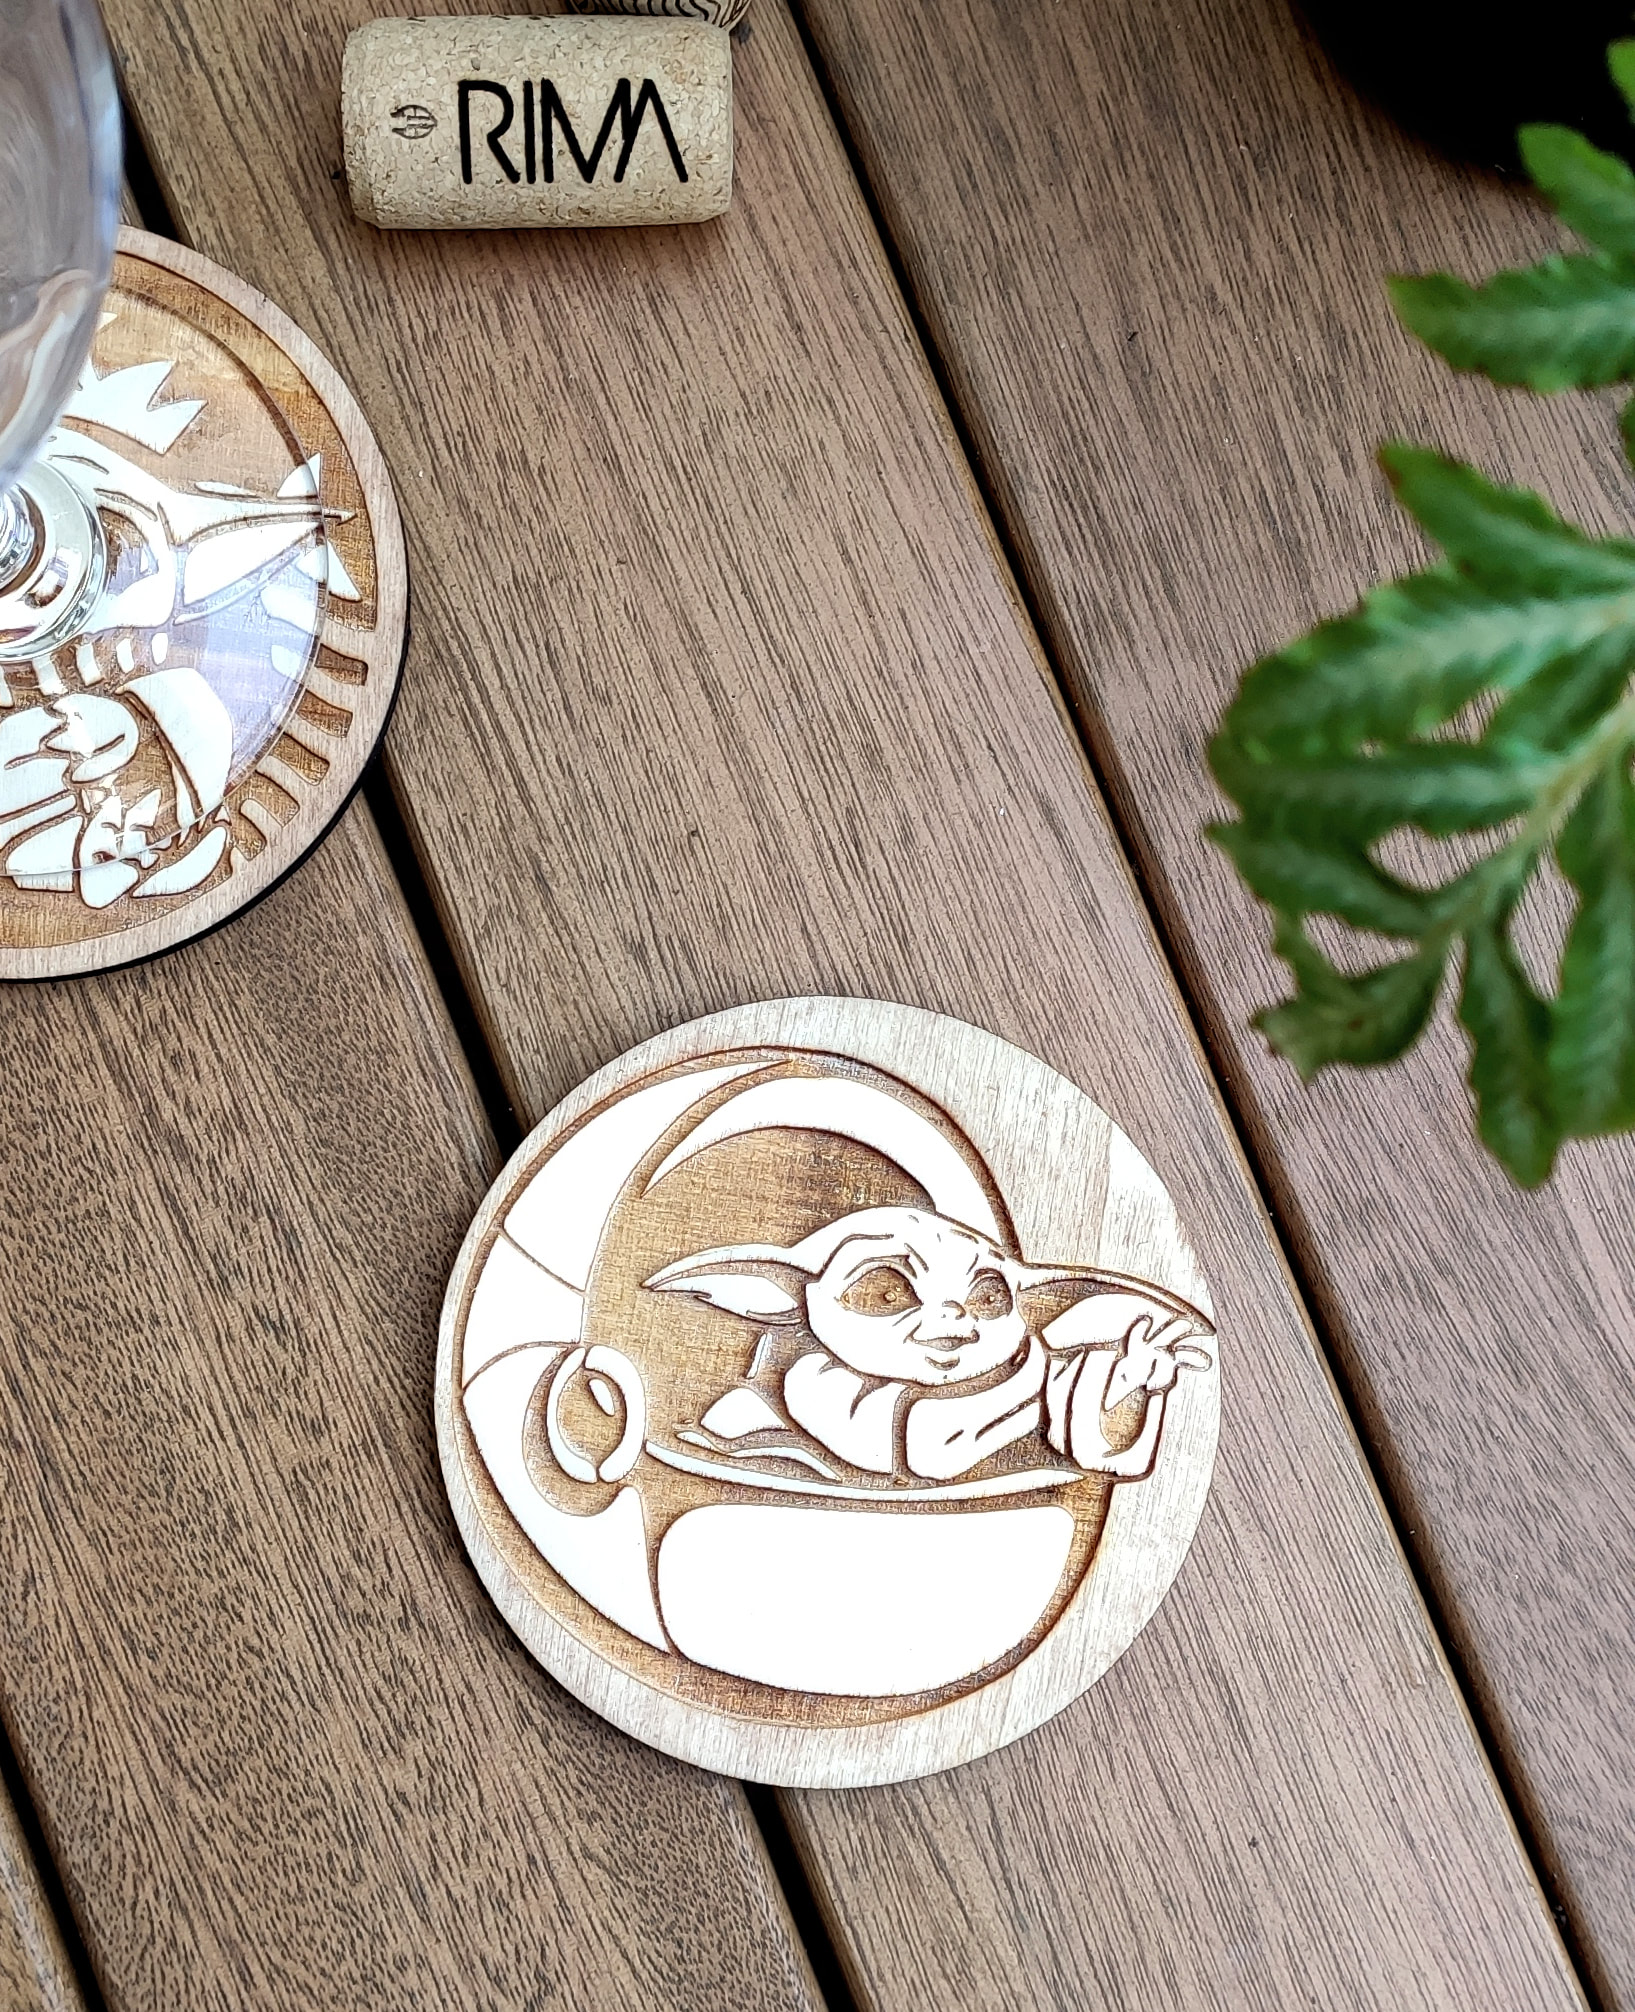 Star wars engraved wooden coasters - set of 6 – BOSTON CREATIVE COMPANY